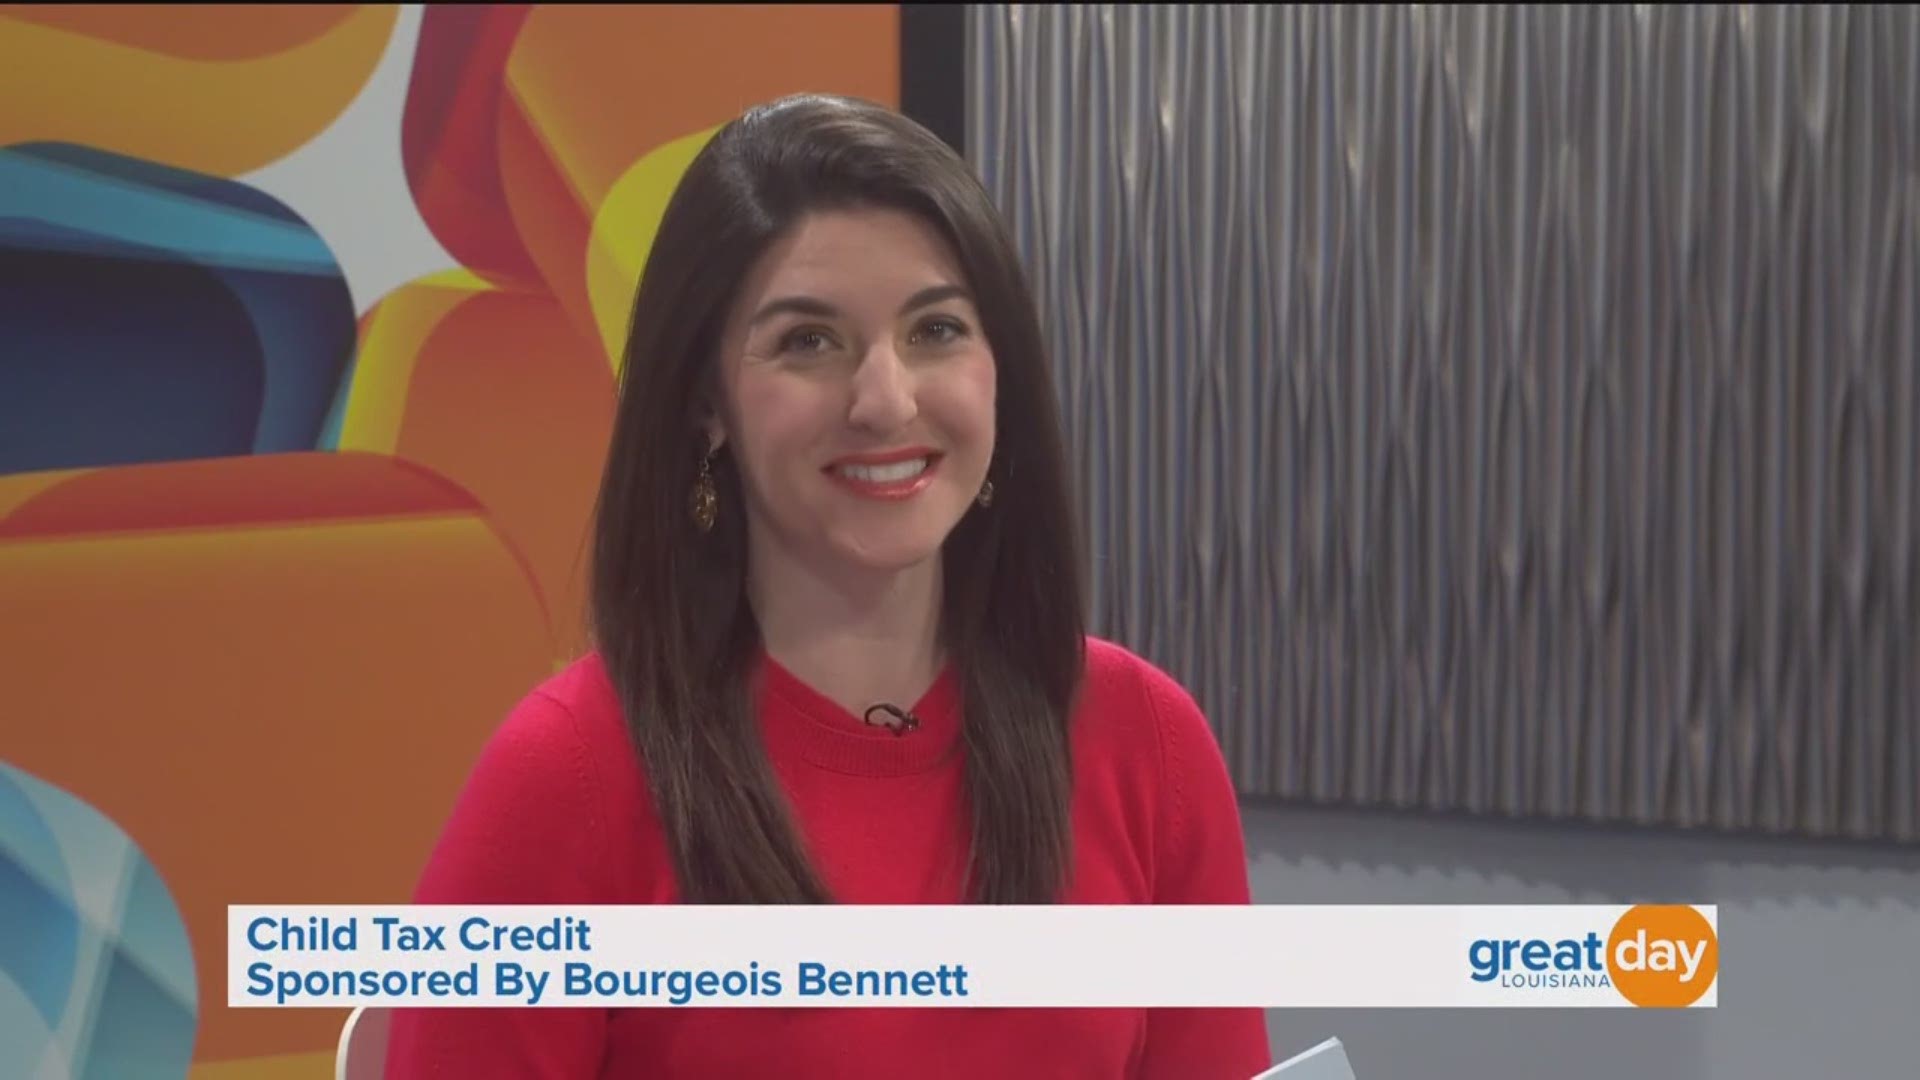 Bourgeois Bennett is back to talk about the child tax credit for 2018.